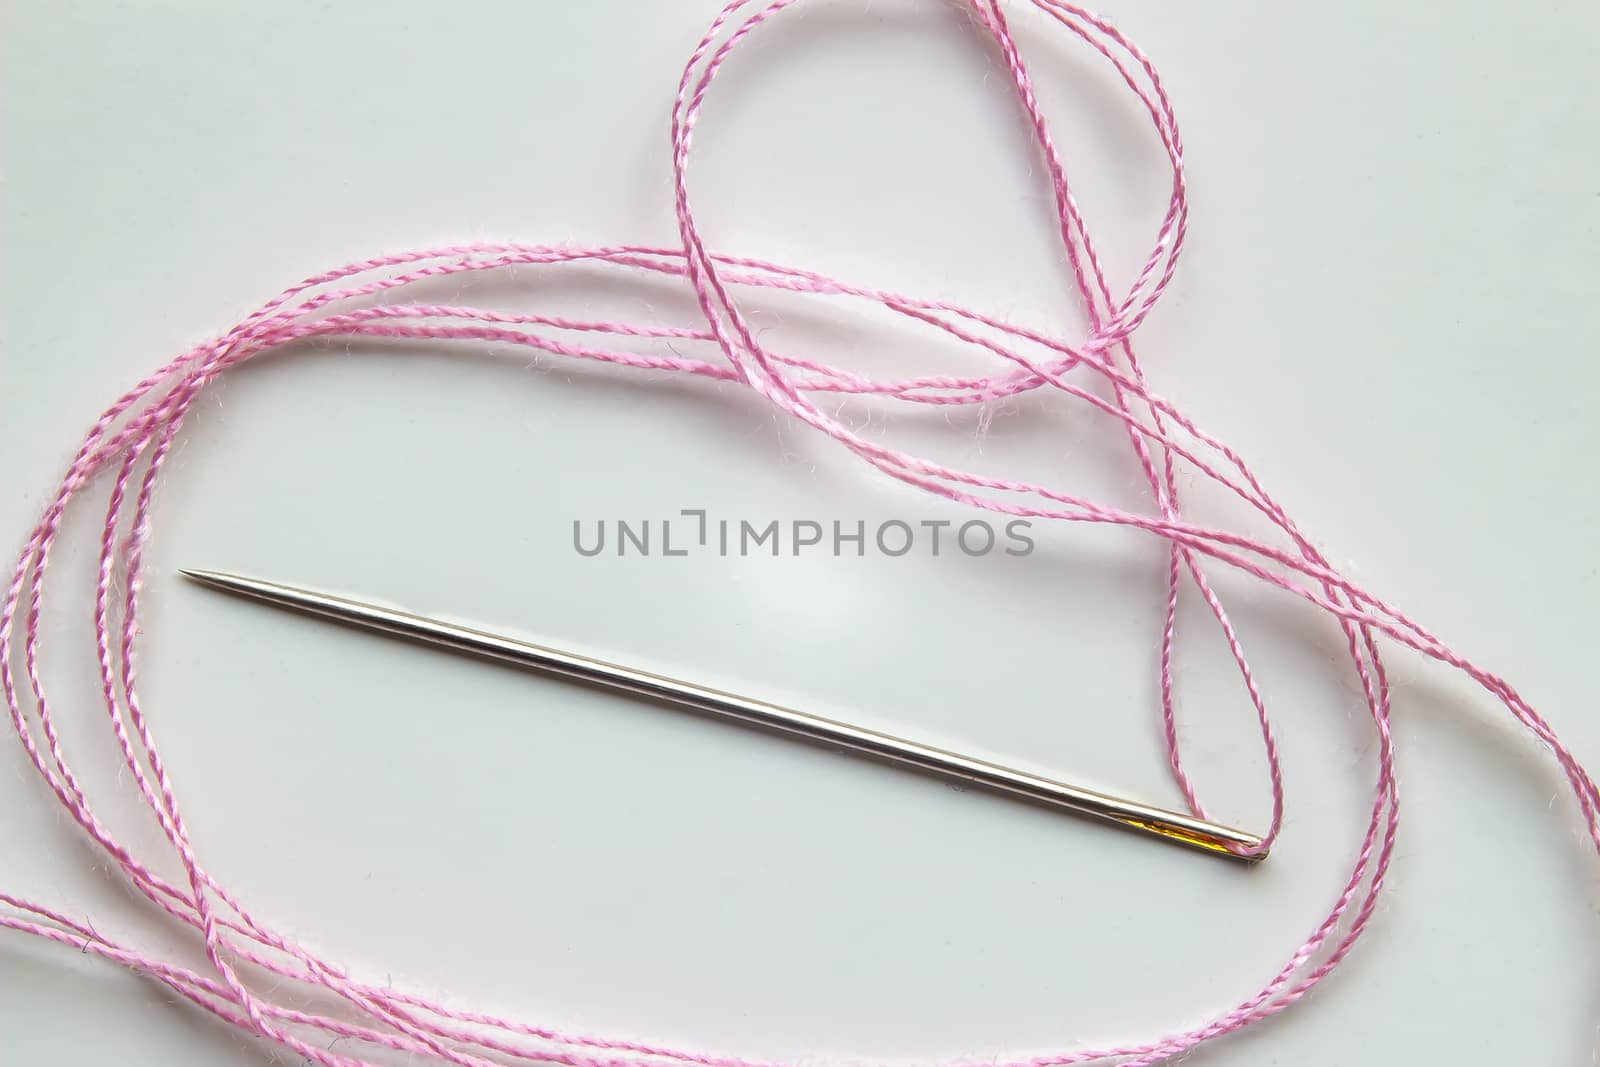 Needle with a Pink Treat on a white background by oasisamuel